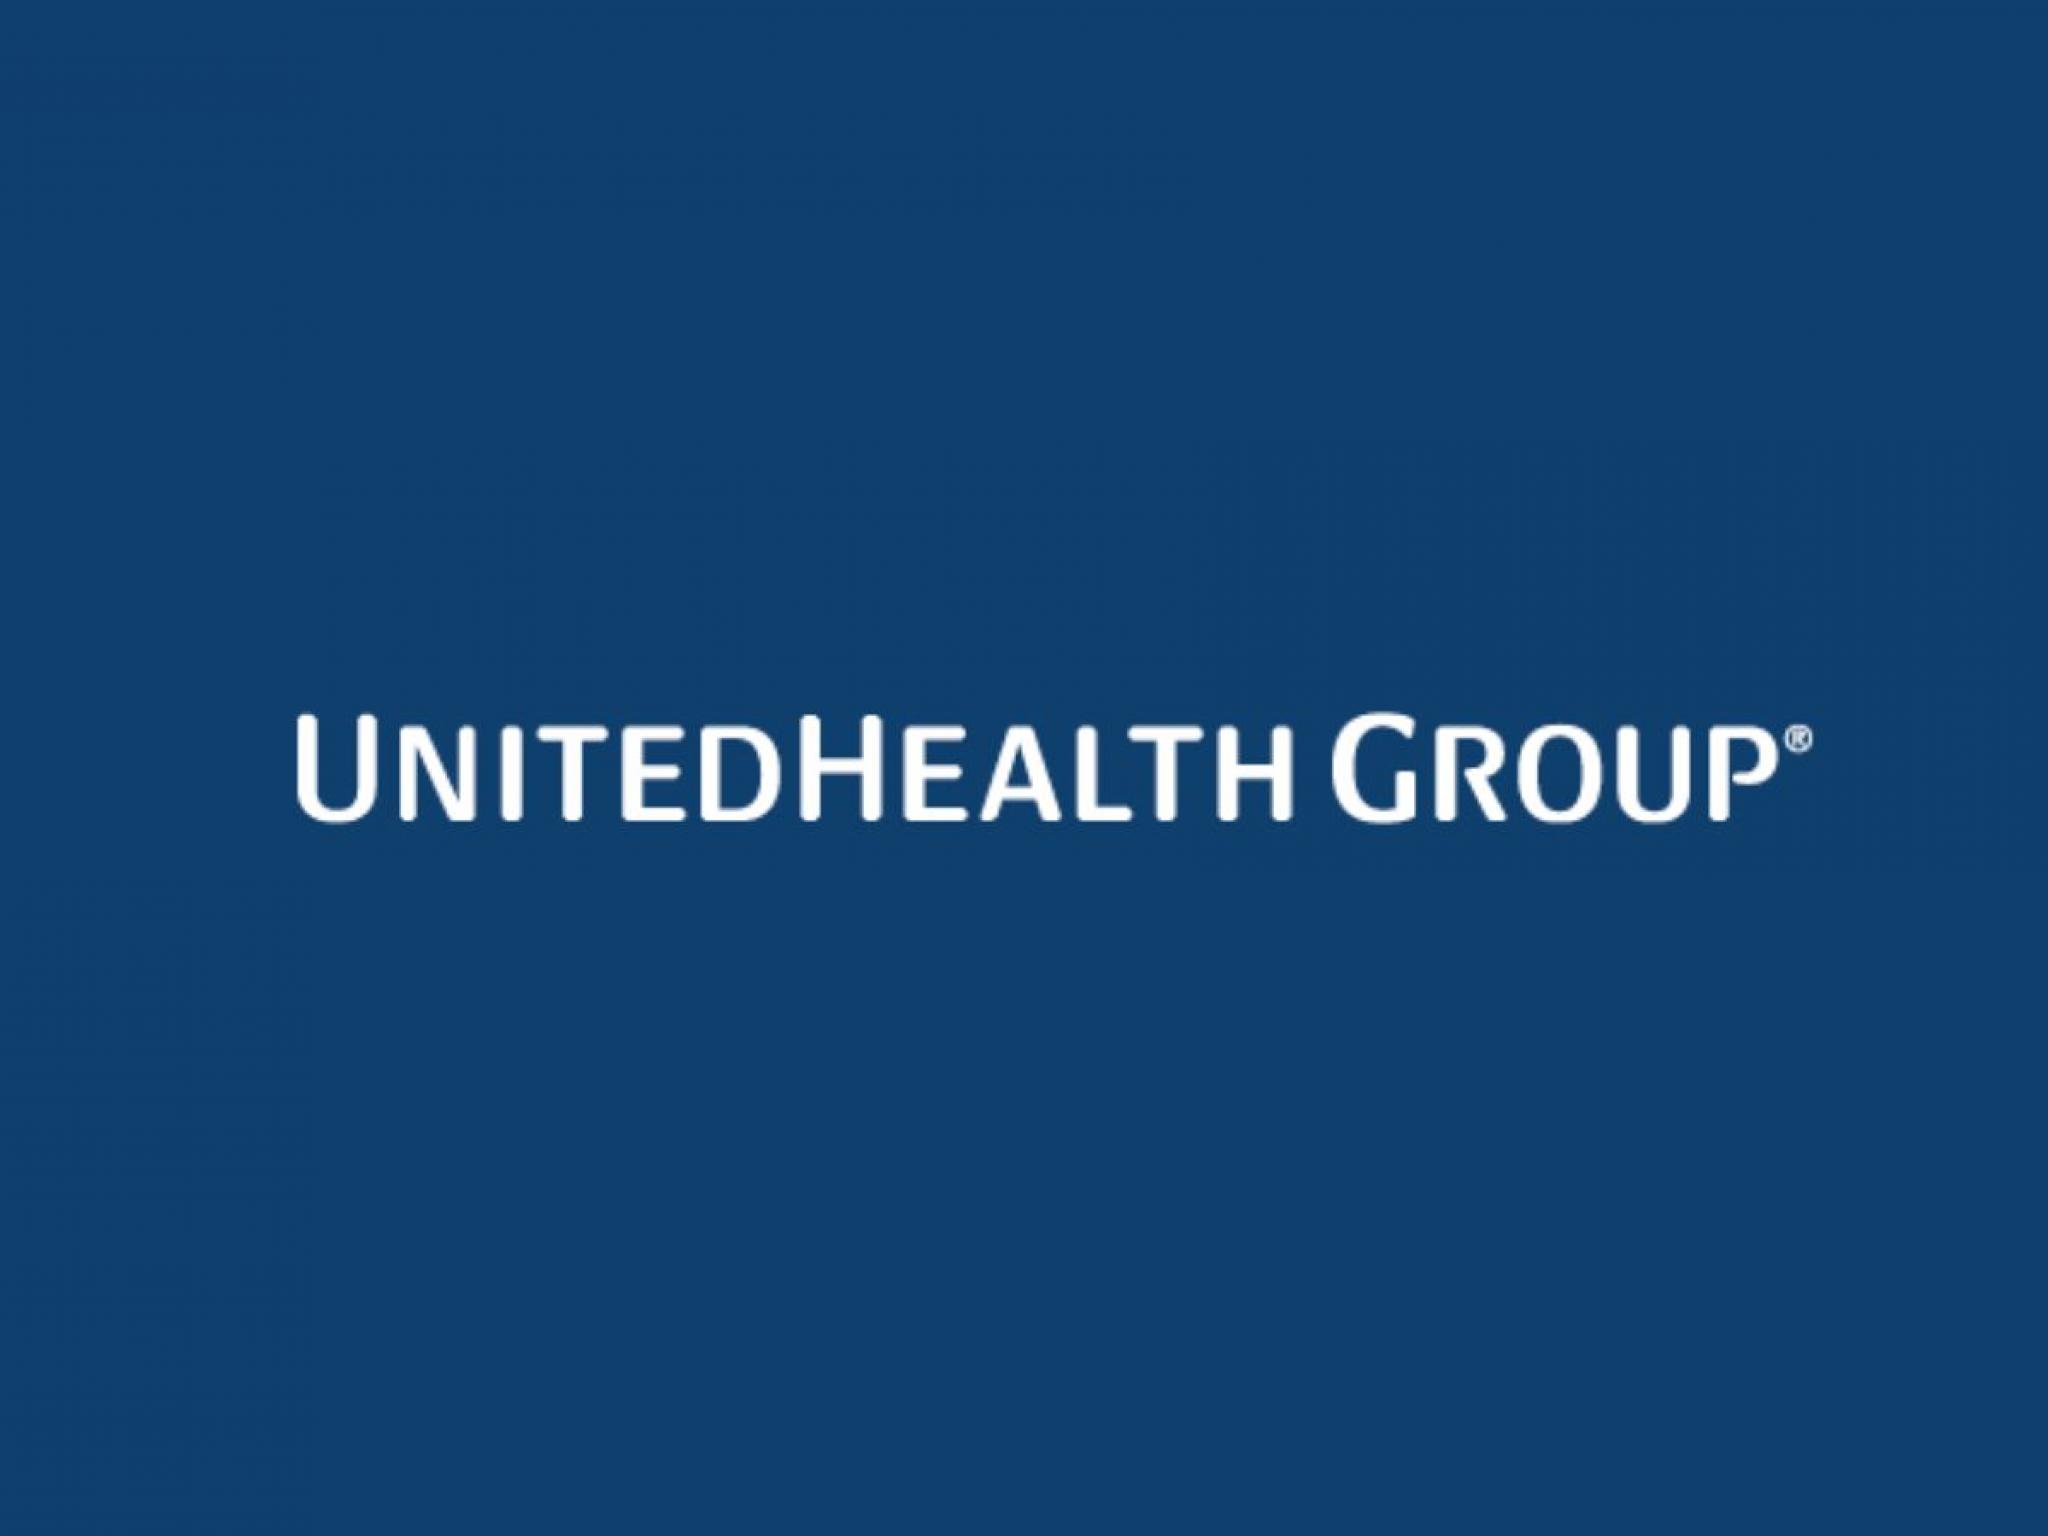  unitedhealth-reports-upbeat-earnings-joins-cullinan-oncology-ericsson-and-other-big-stocks-moving-higher-on-tuesday 